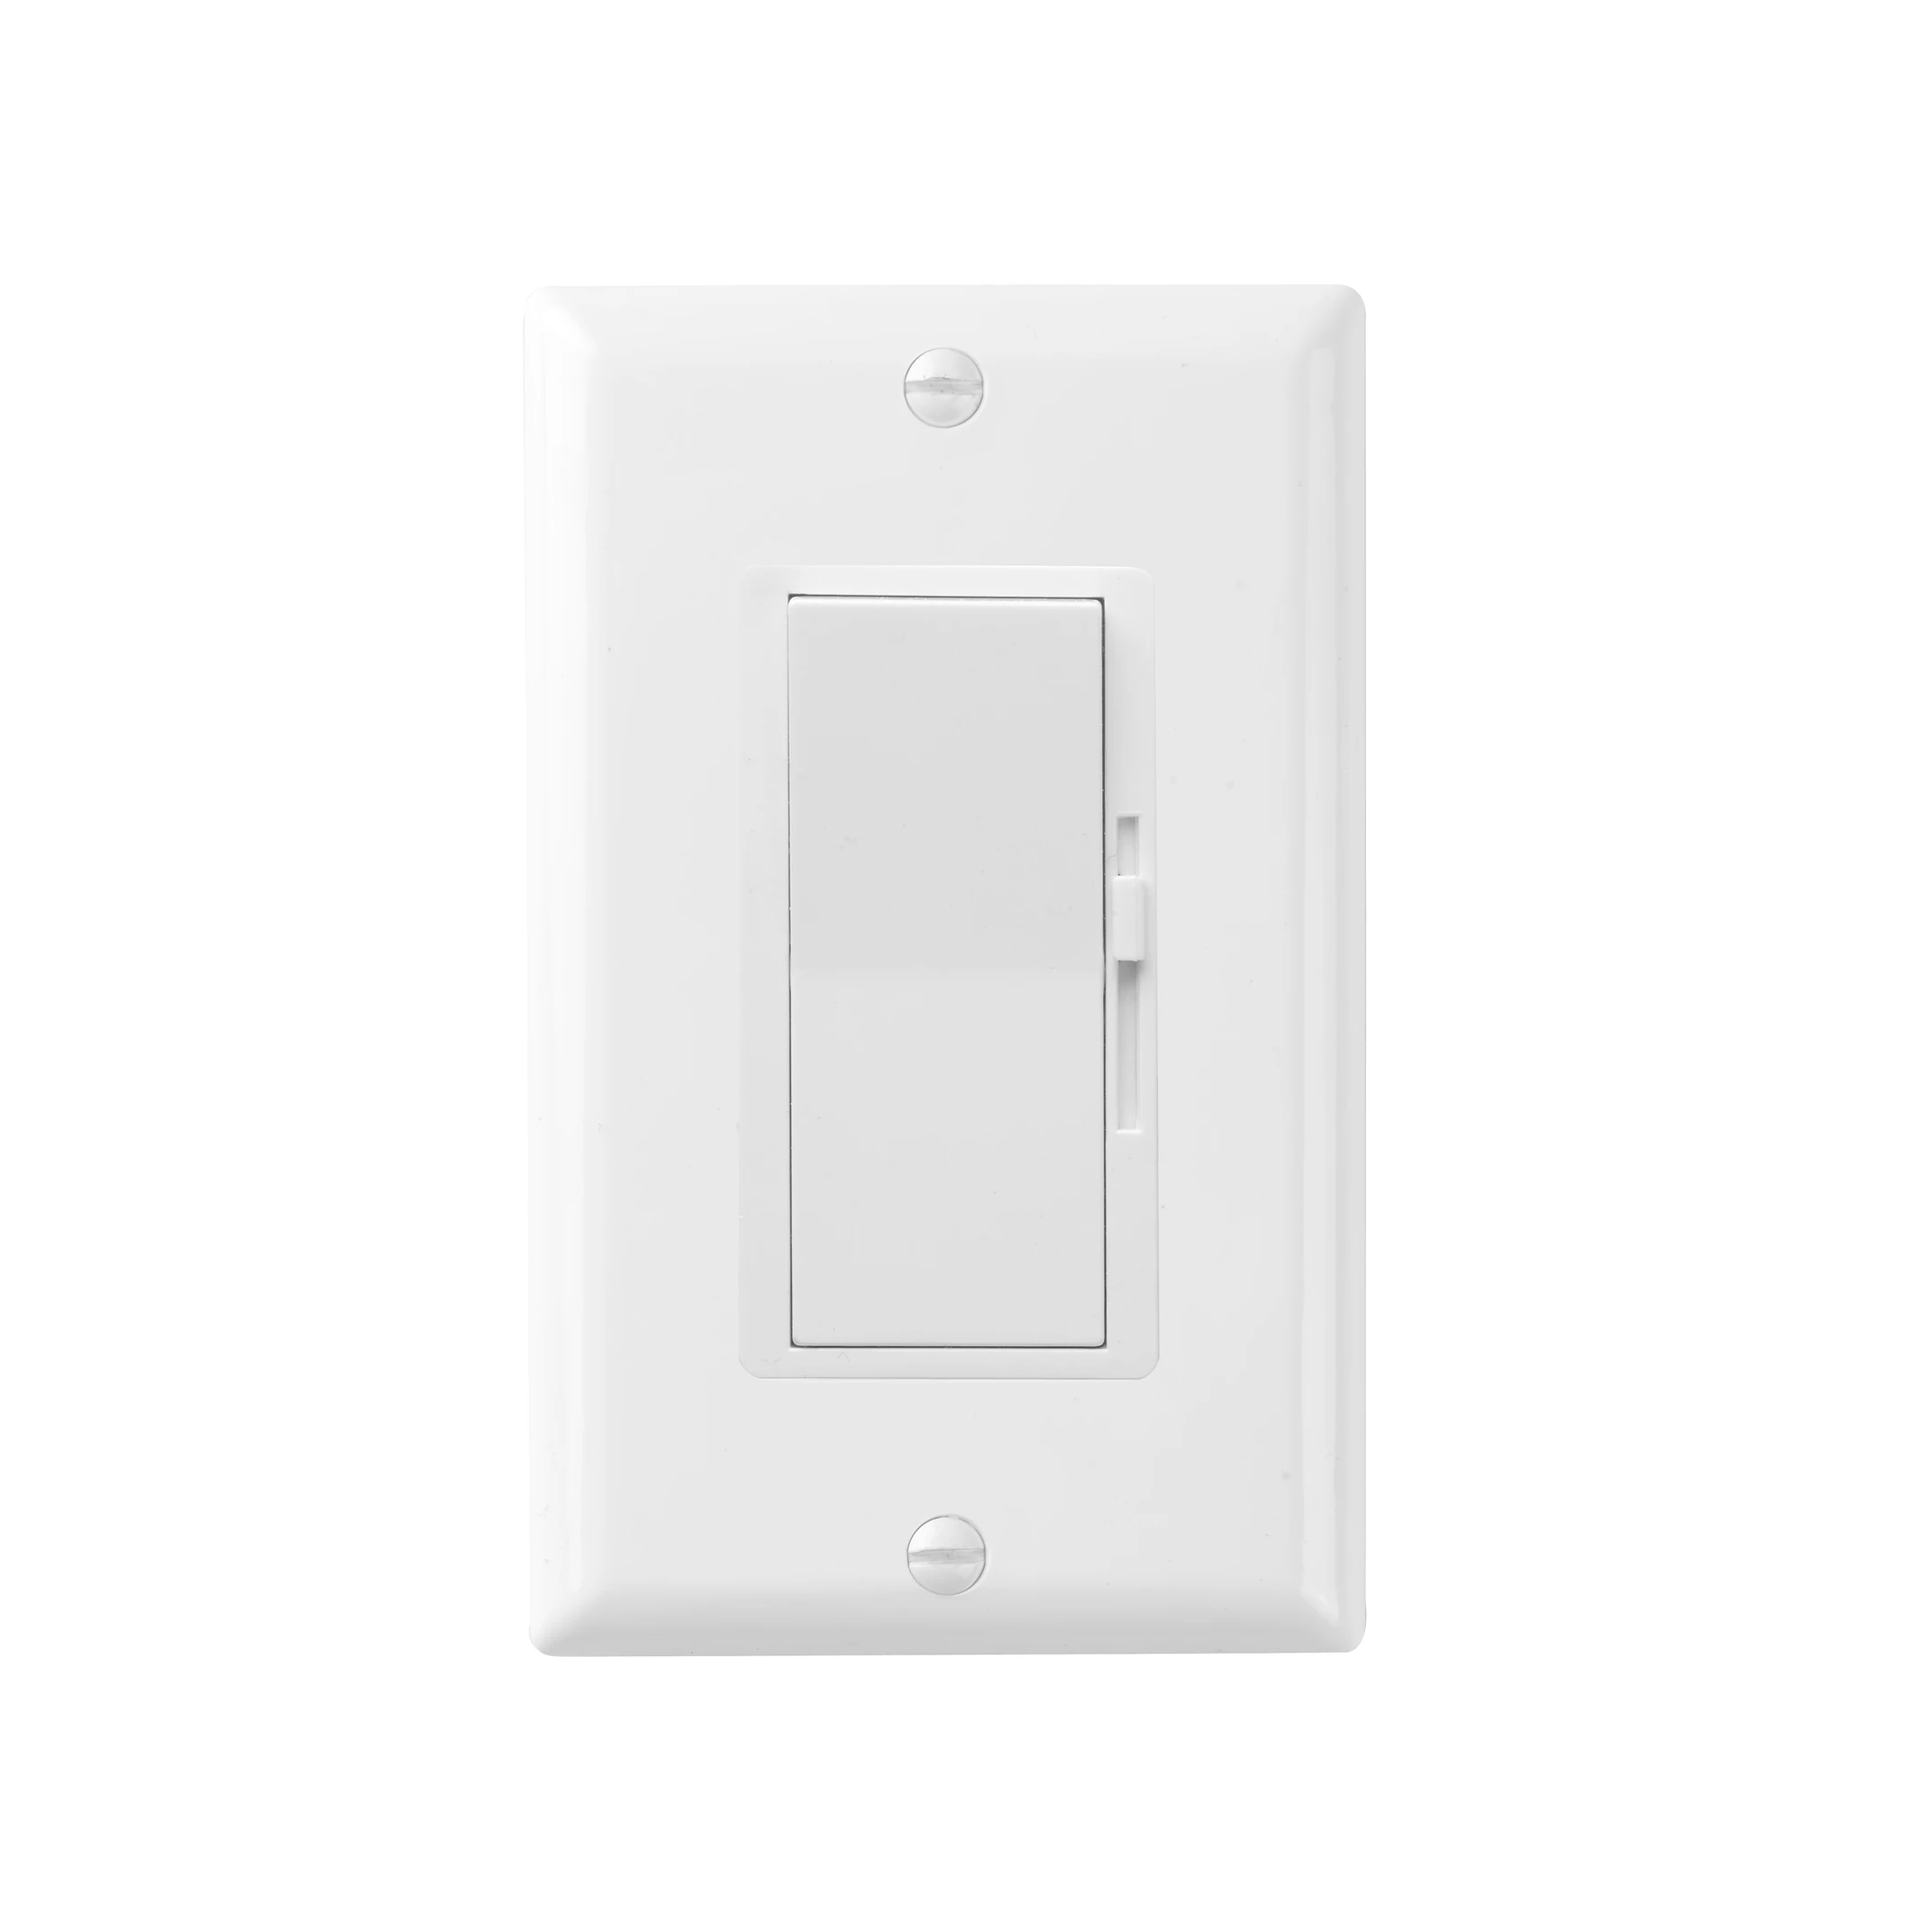 UL certification American Standard colored wall switches universal led light switch dimmer module